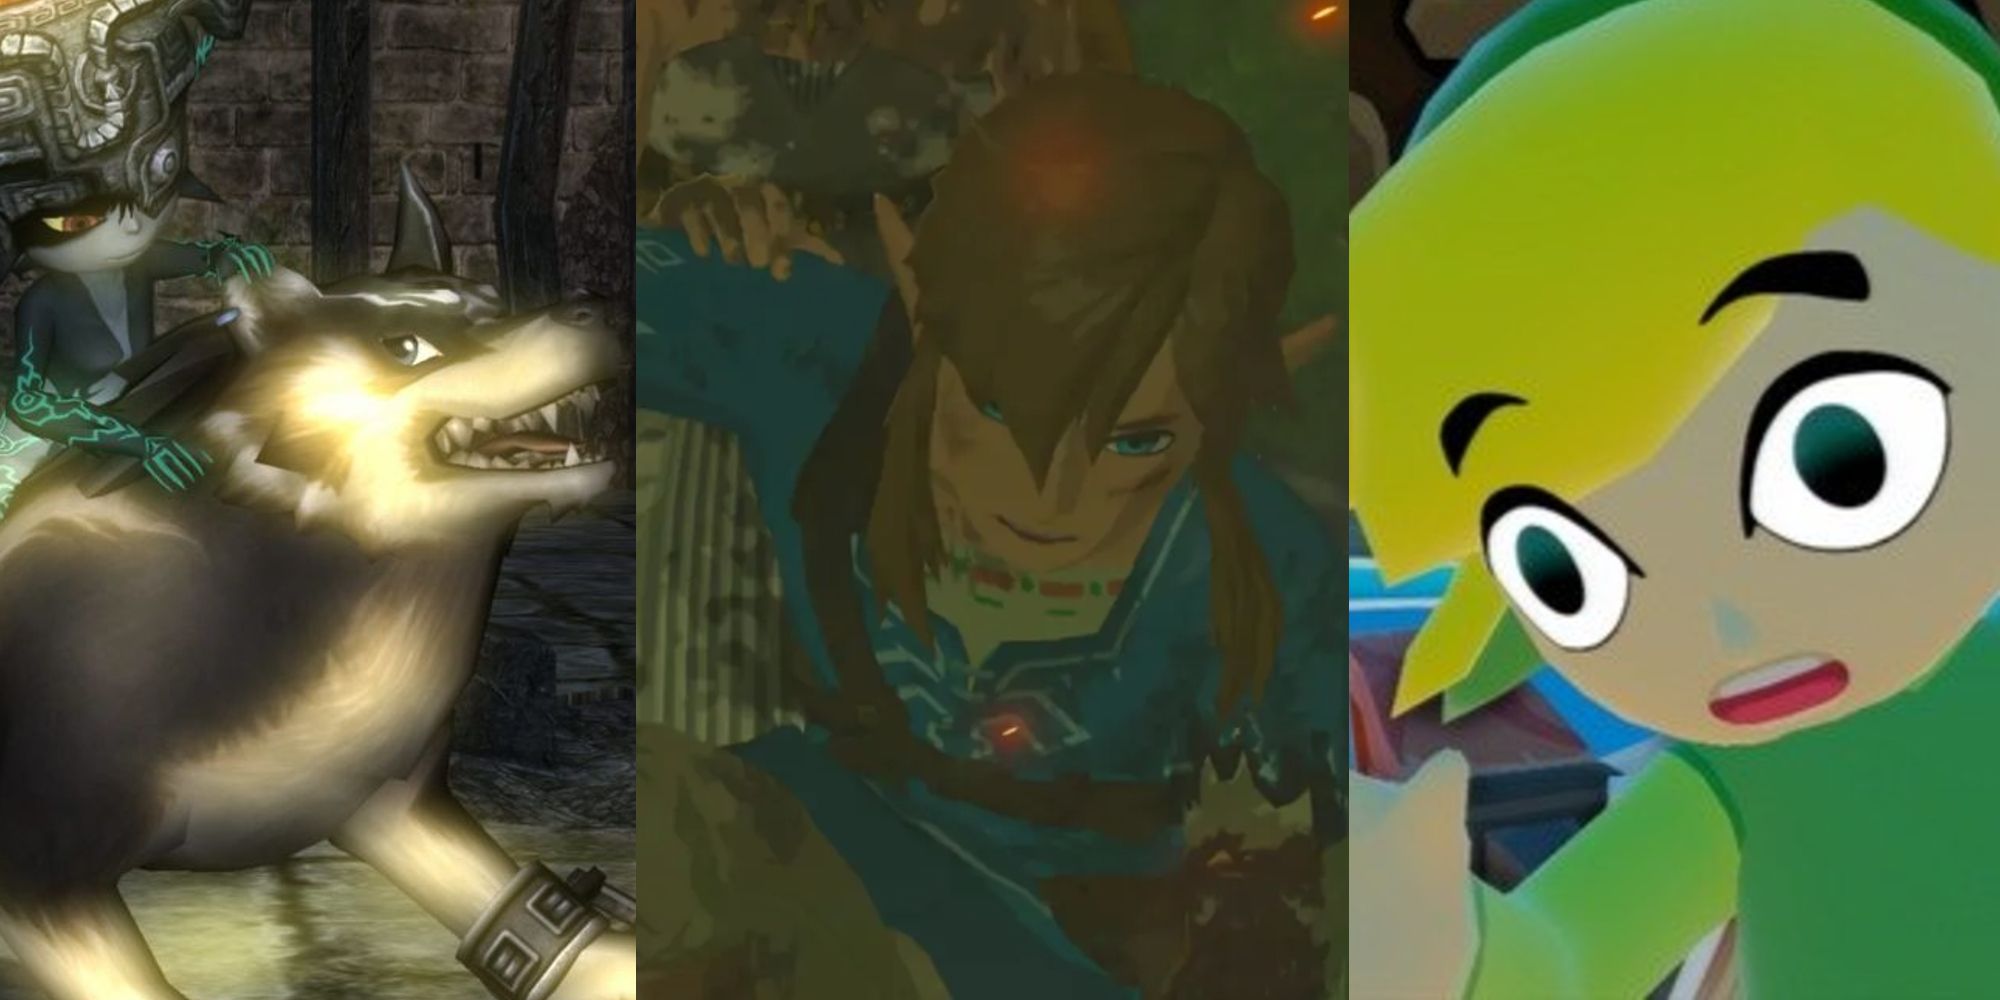 Midna riding Wolf Link in Twilight Princess; A dirtied Link kneeling in battle in BOTW; A shocked Toon Link on a boat in Wind Waker